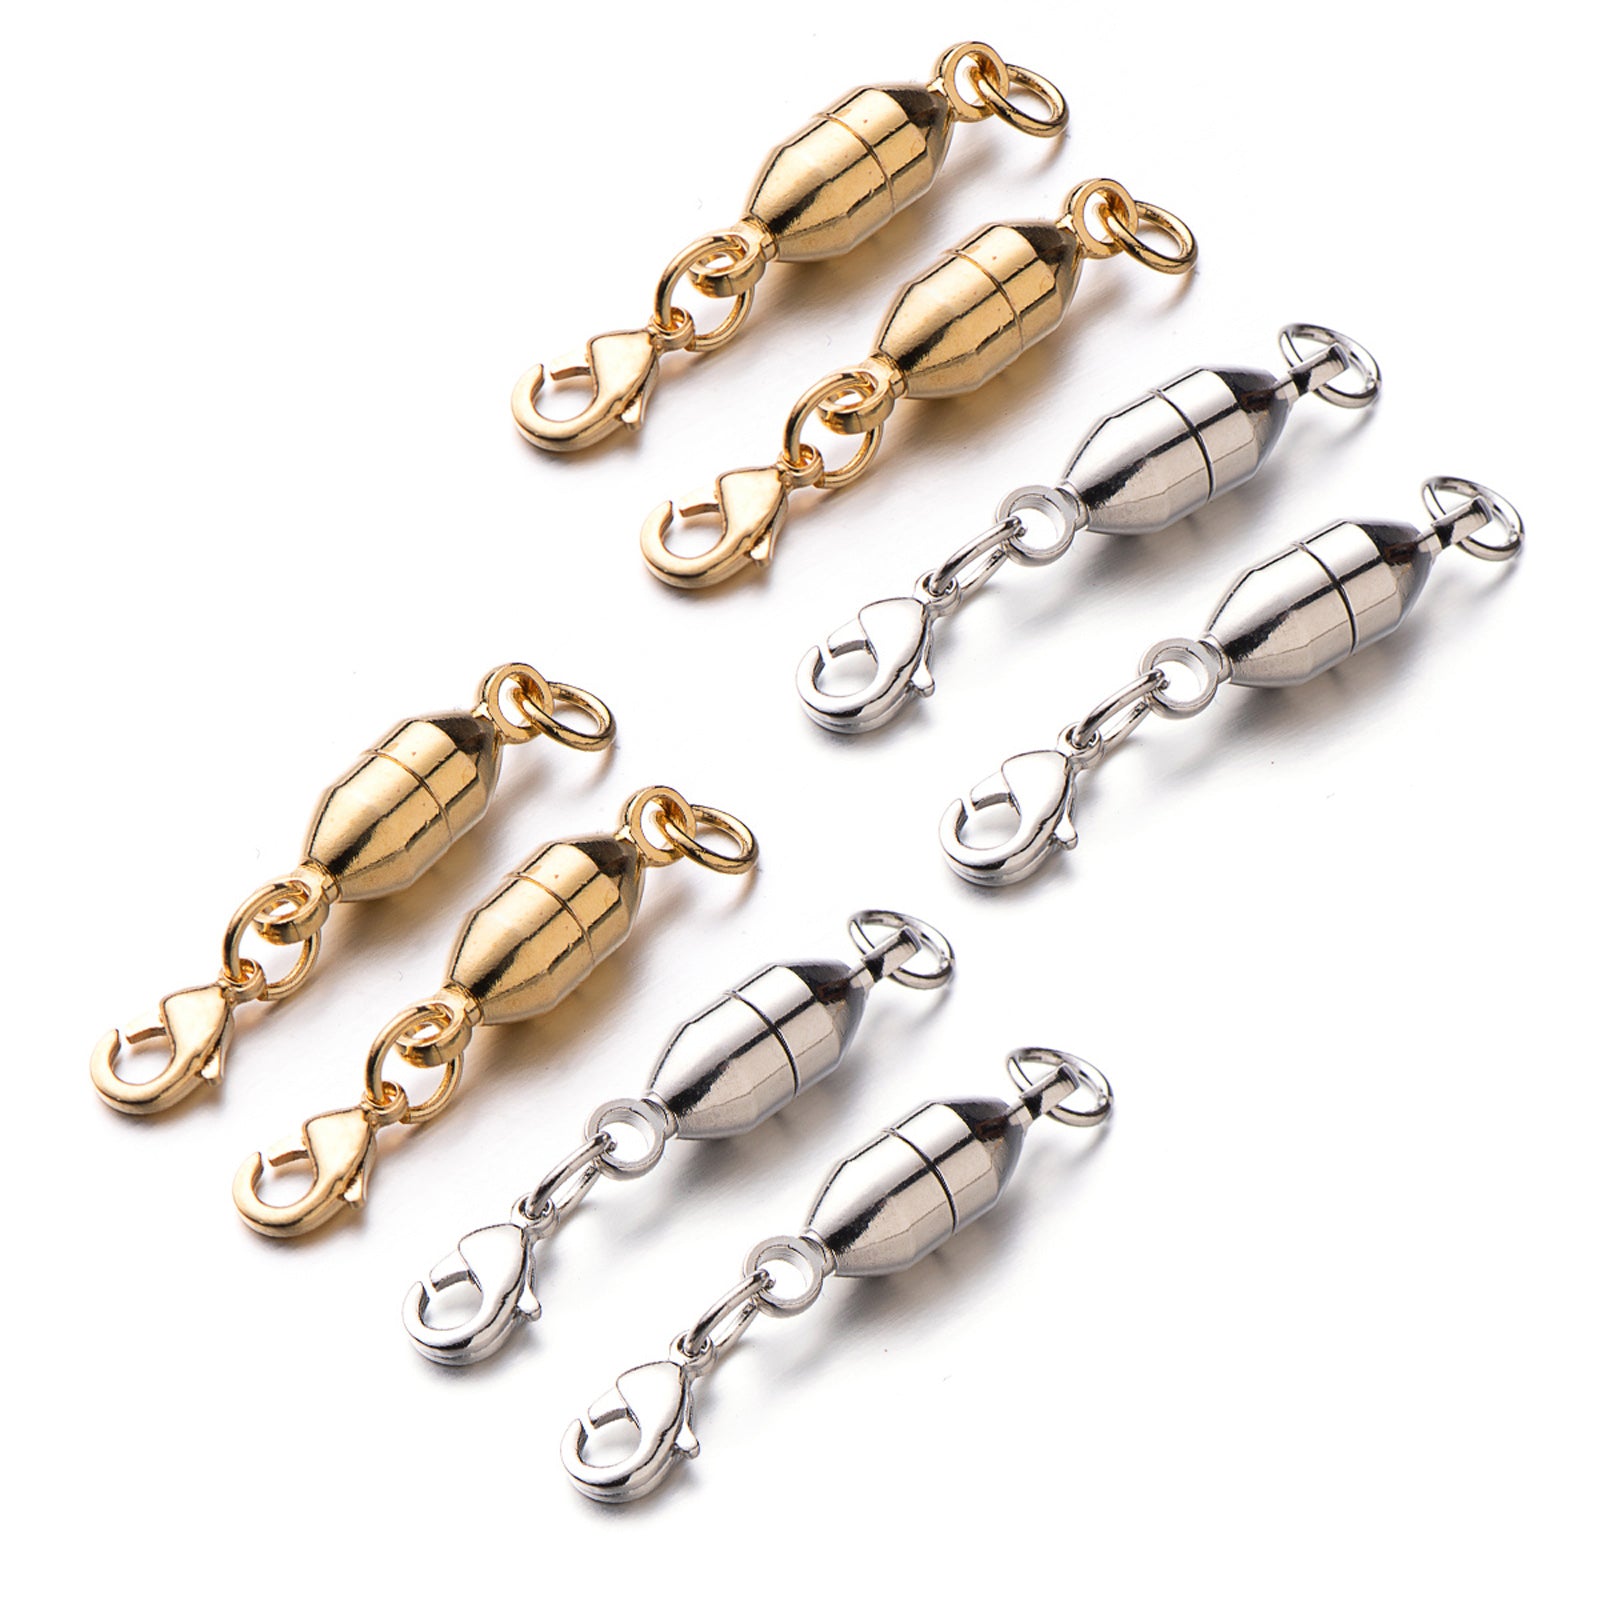 6mm Magnetic Jewelry Lobster Clasps for Necklaces and Bracelets – zpsolution